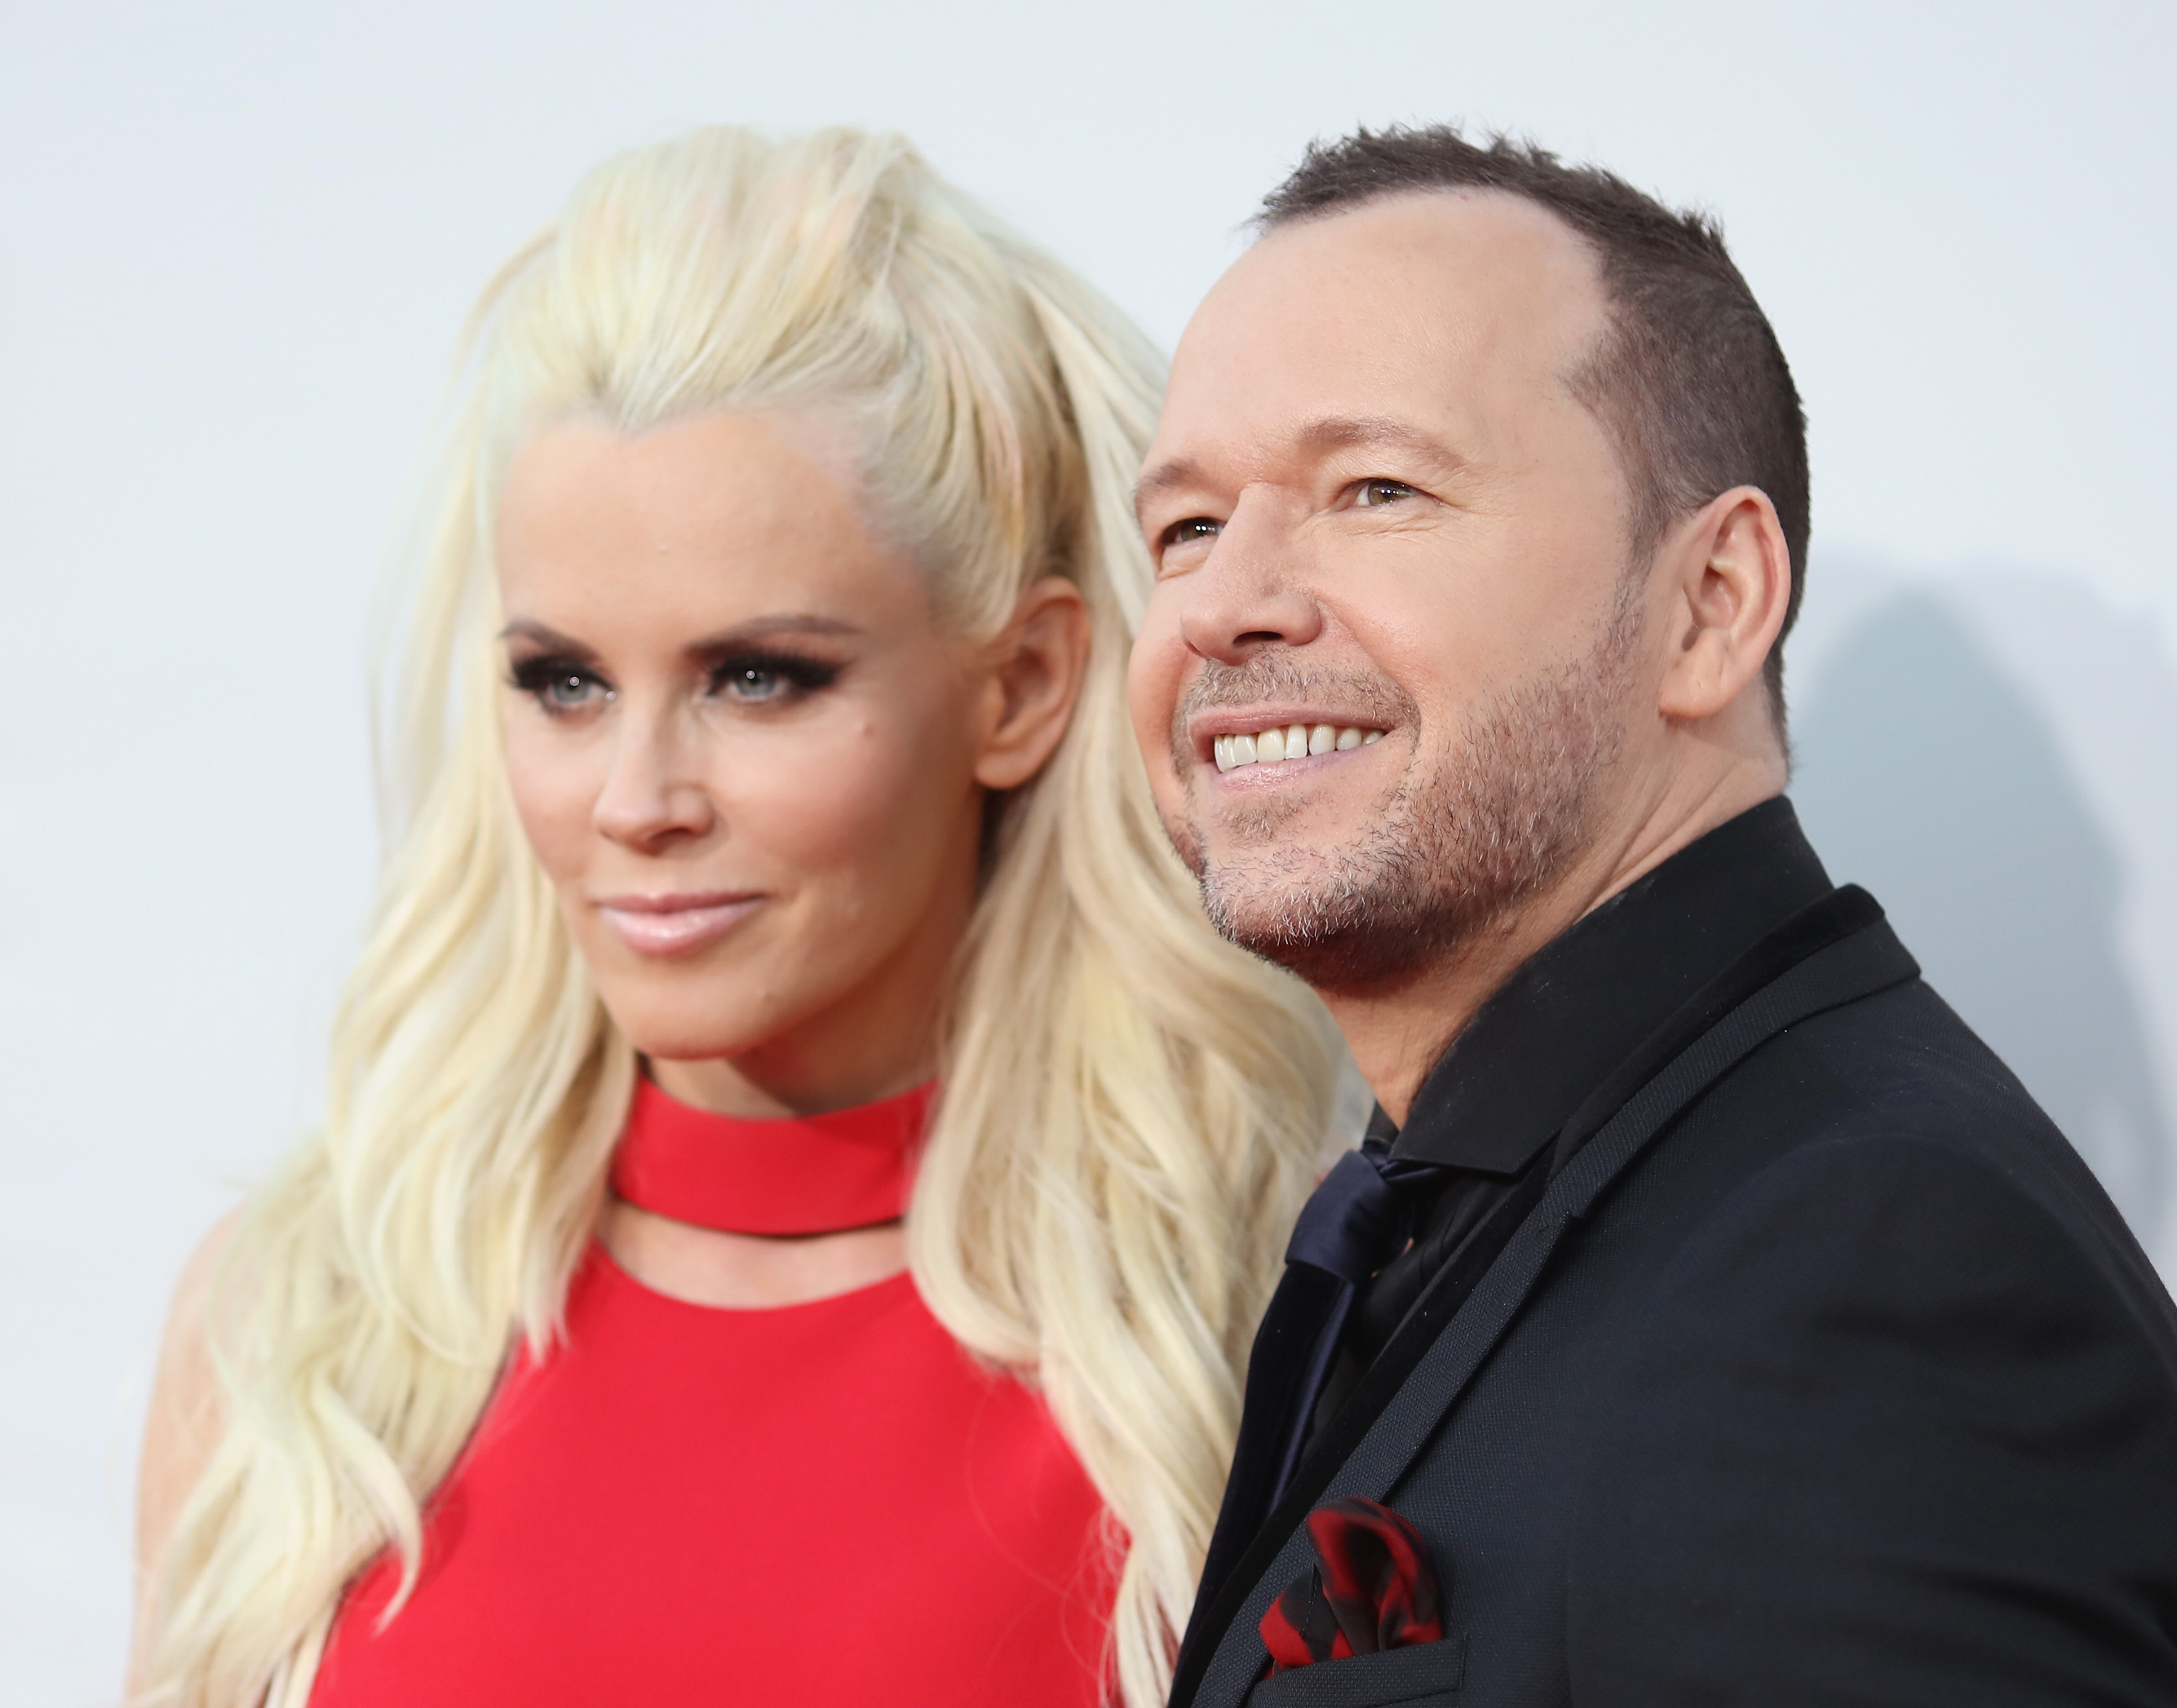 Donnie Wahlberg Jenny Mccarthy Fast Facts To Know